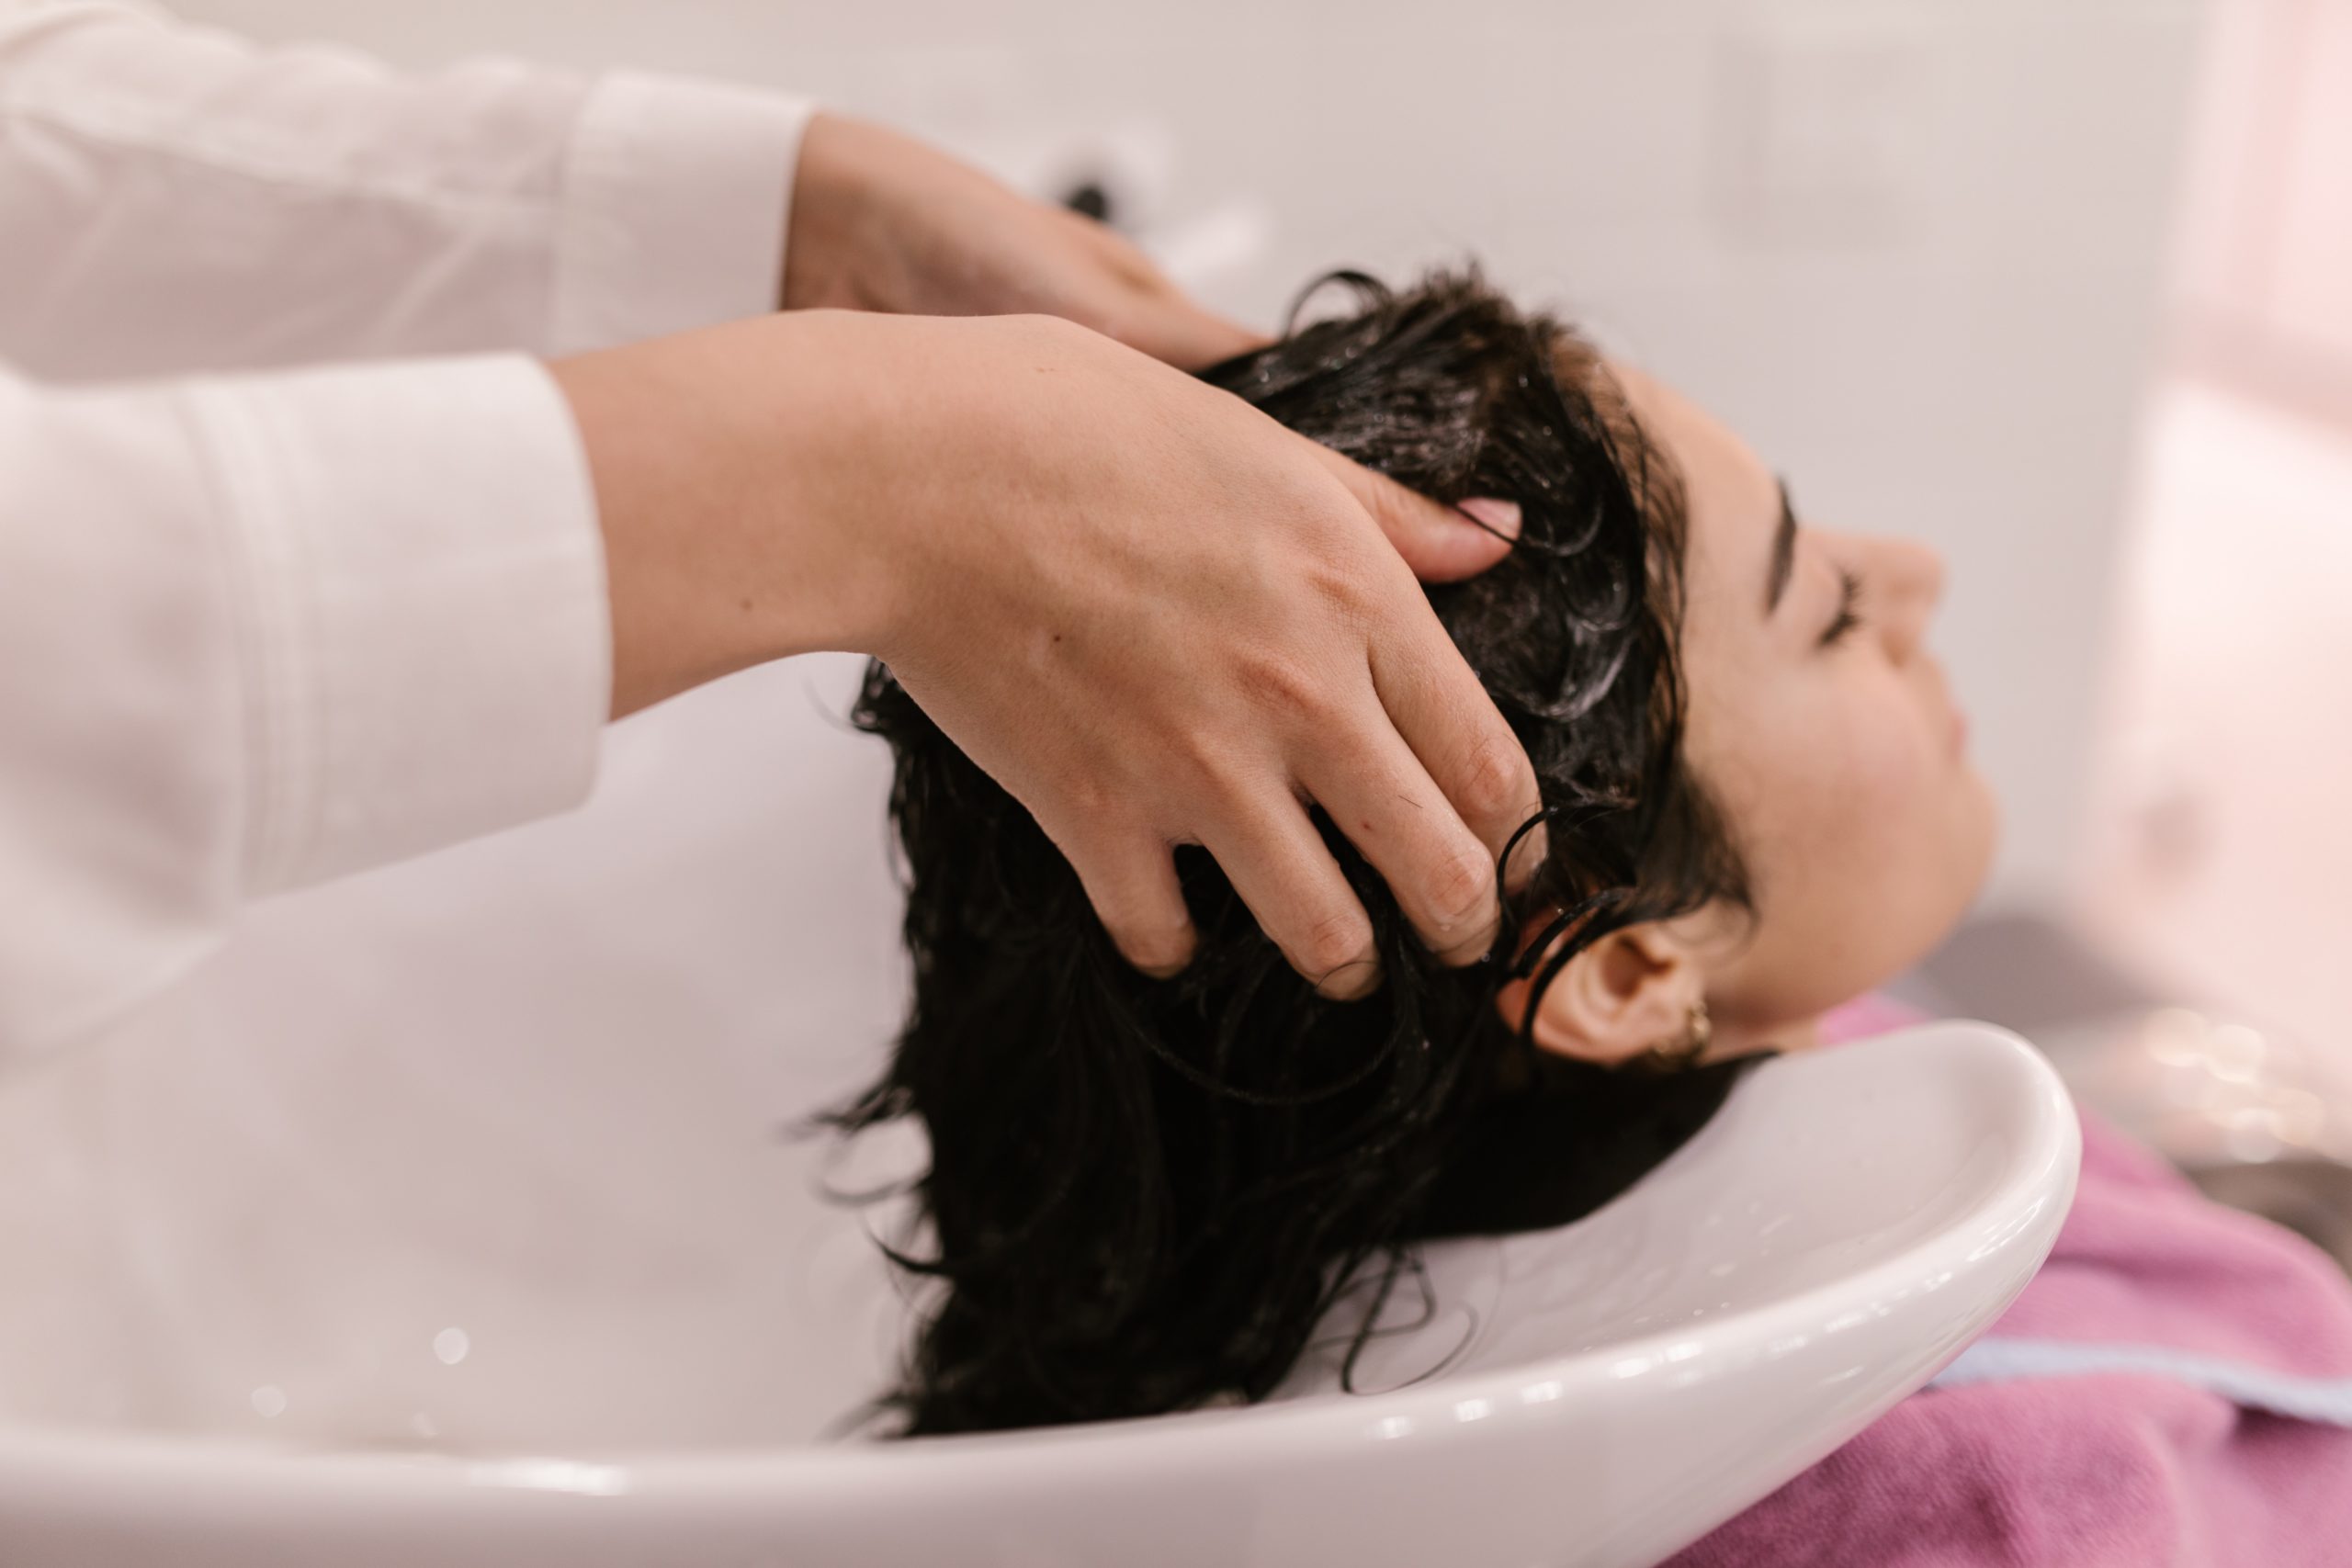 How often should you wash your hair